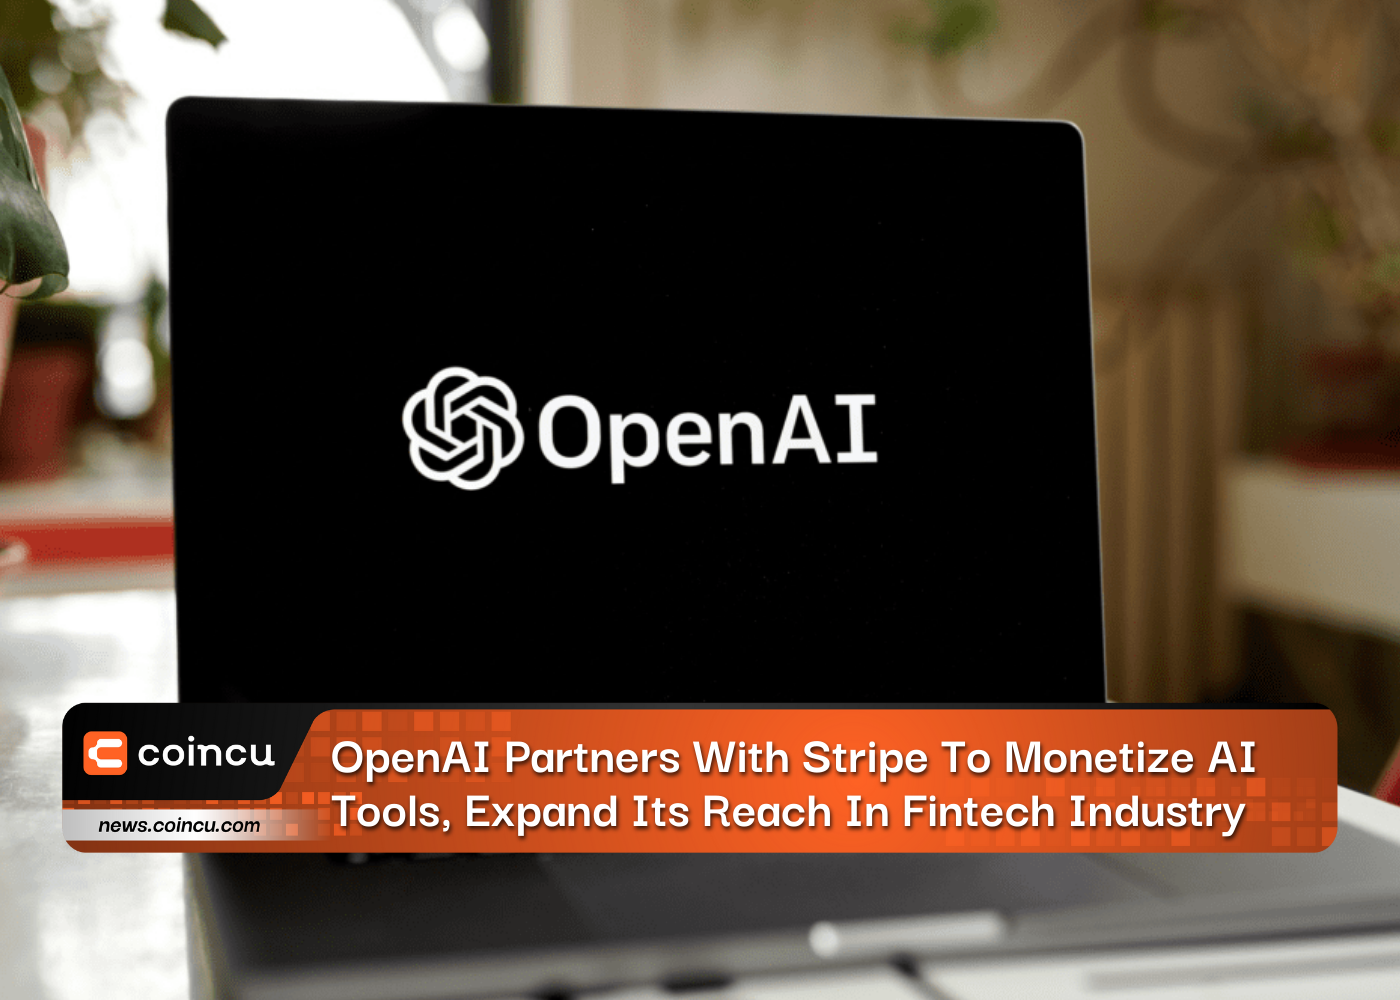 OpenAI Partners With Stripe To Monetize AI Tools, Expand Its Reach In Fintech Industry